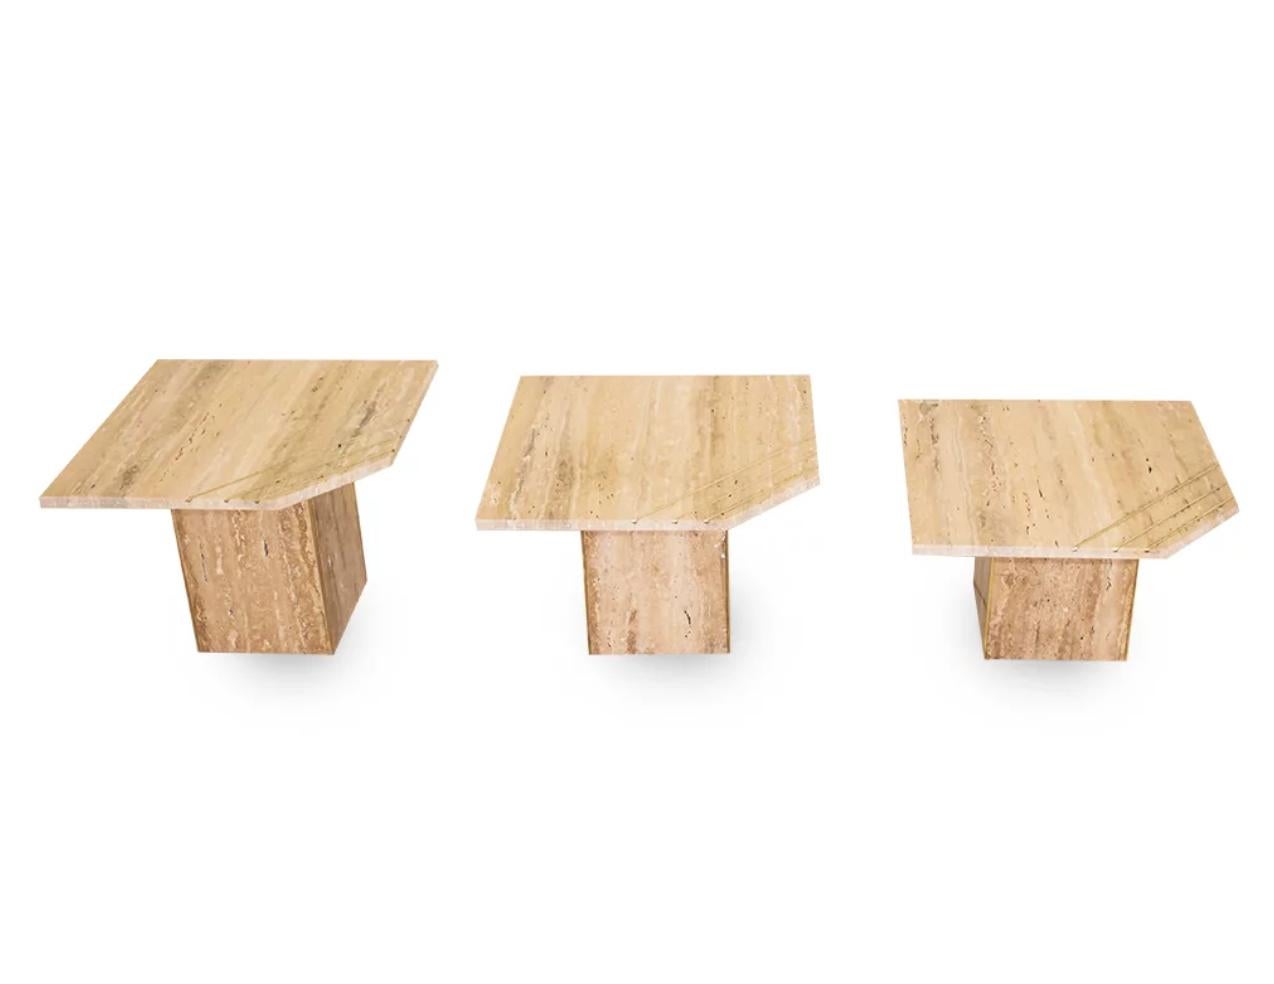 Travertine marble coffee table set, made in Italy, entirely hand crafted: 3 Ivory Cream Travertine Tables created at different heights to nest into each other, the geometric design is quite enticing with a cut corner and a brass decor with 3 inset